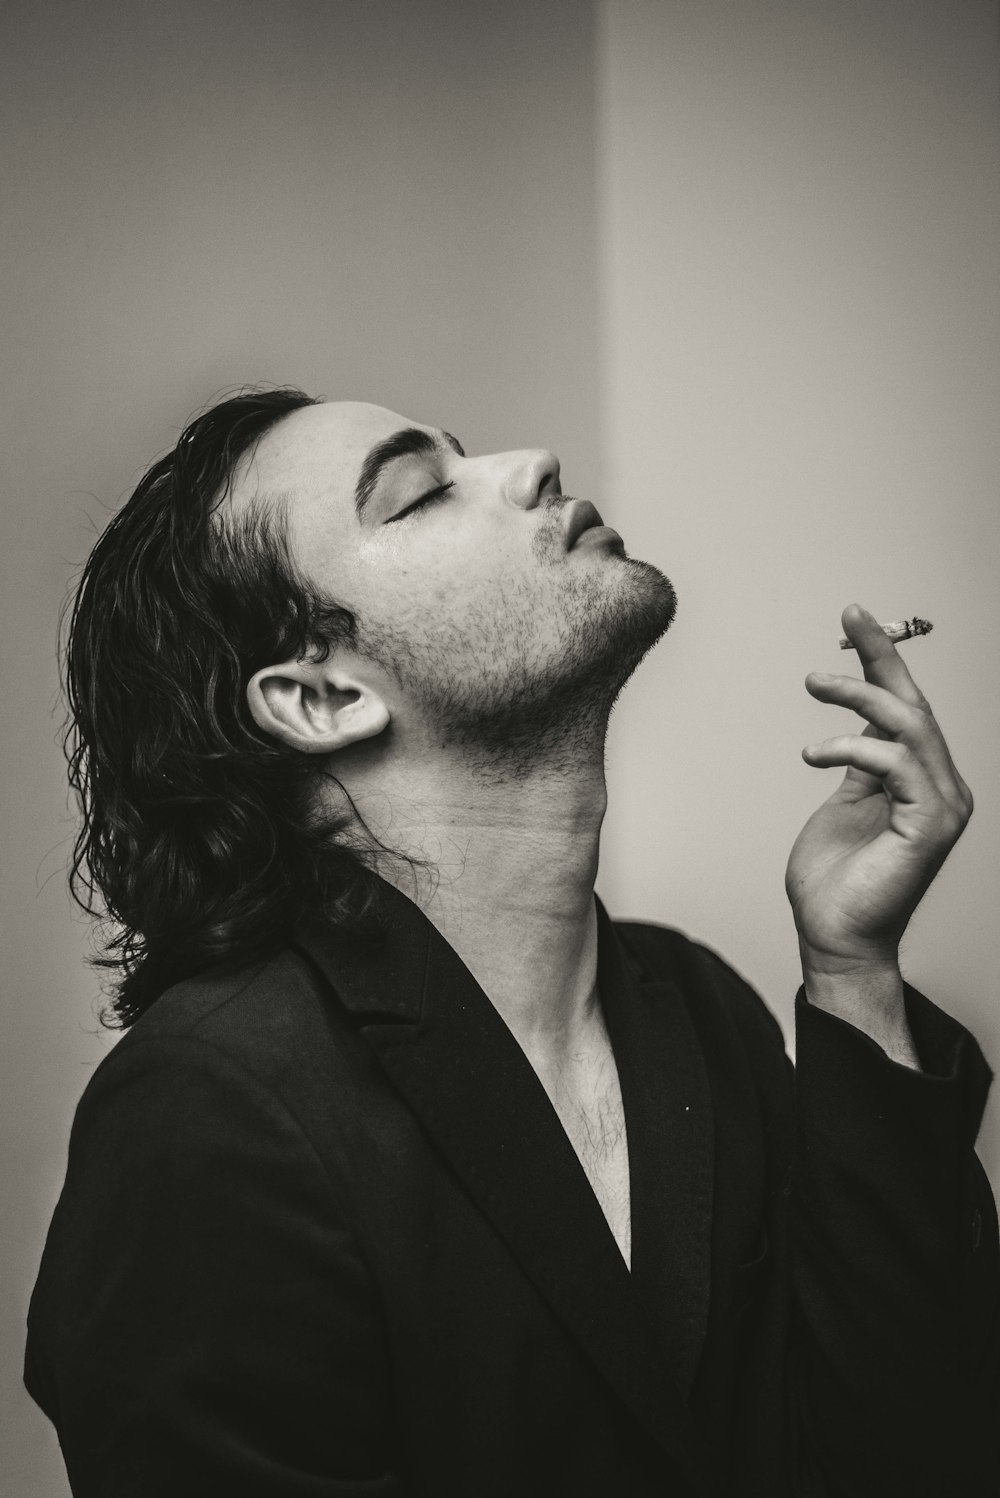 a man with long hair smoking a cigarette